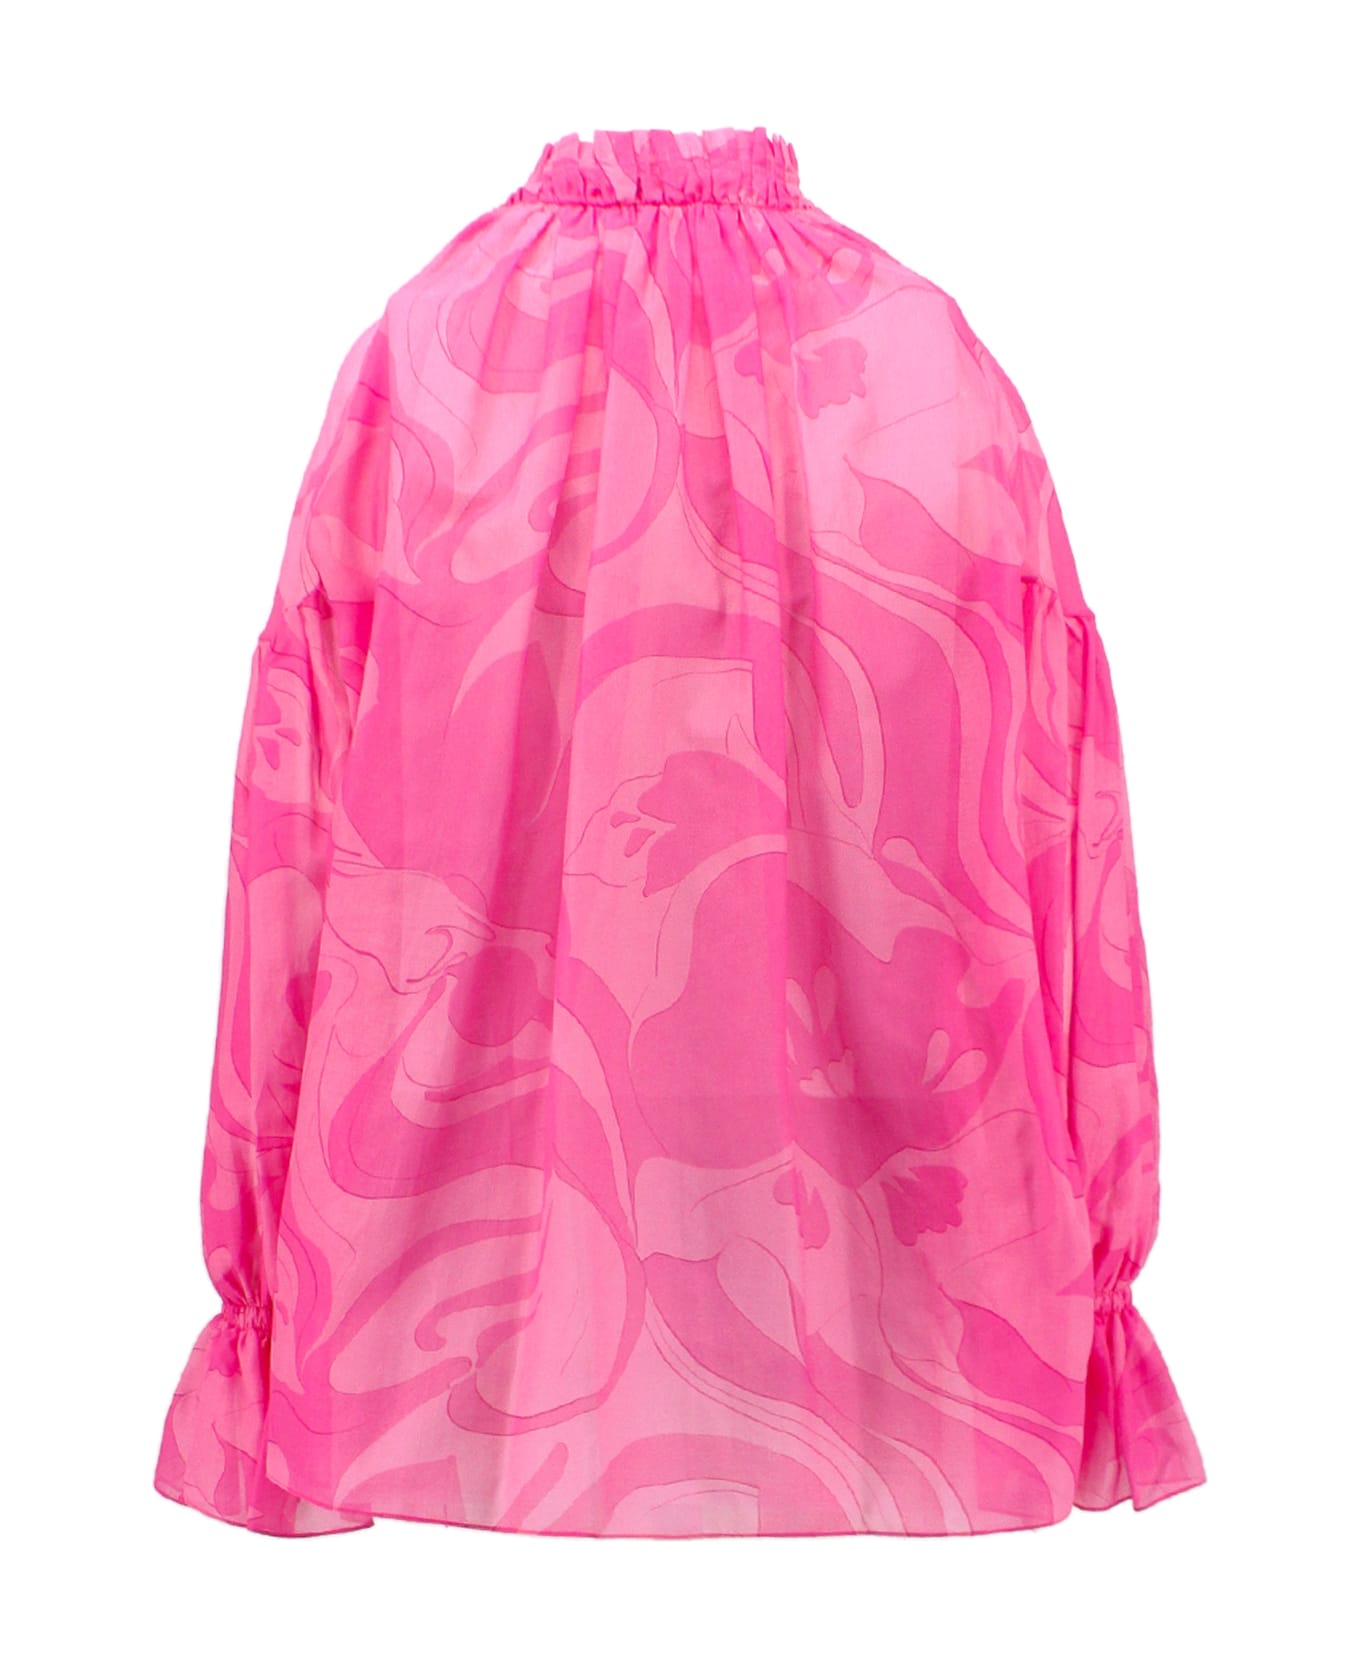 Etro Printed Voile Blouse - Pink